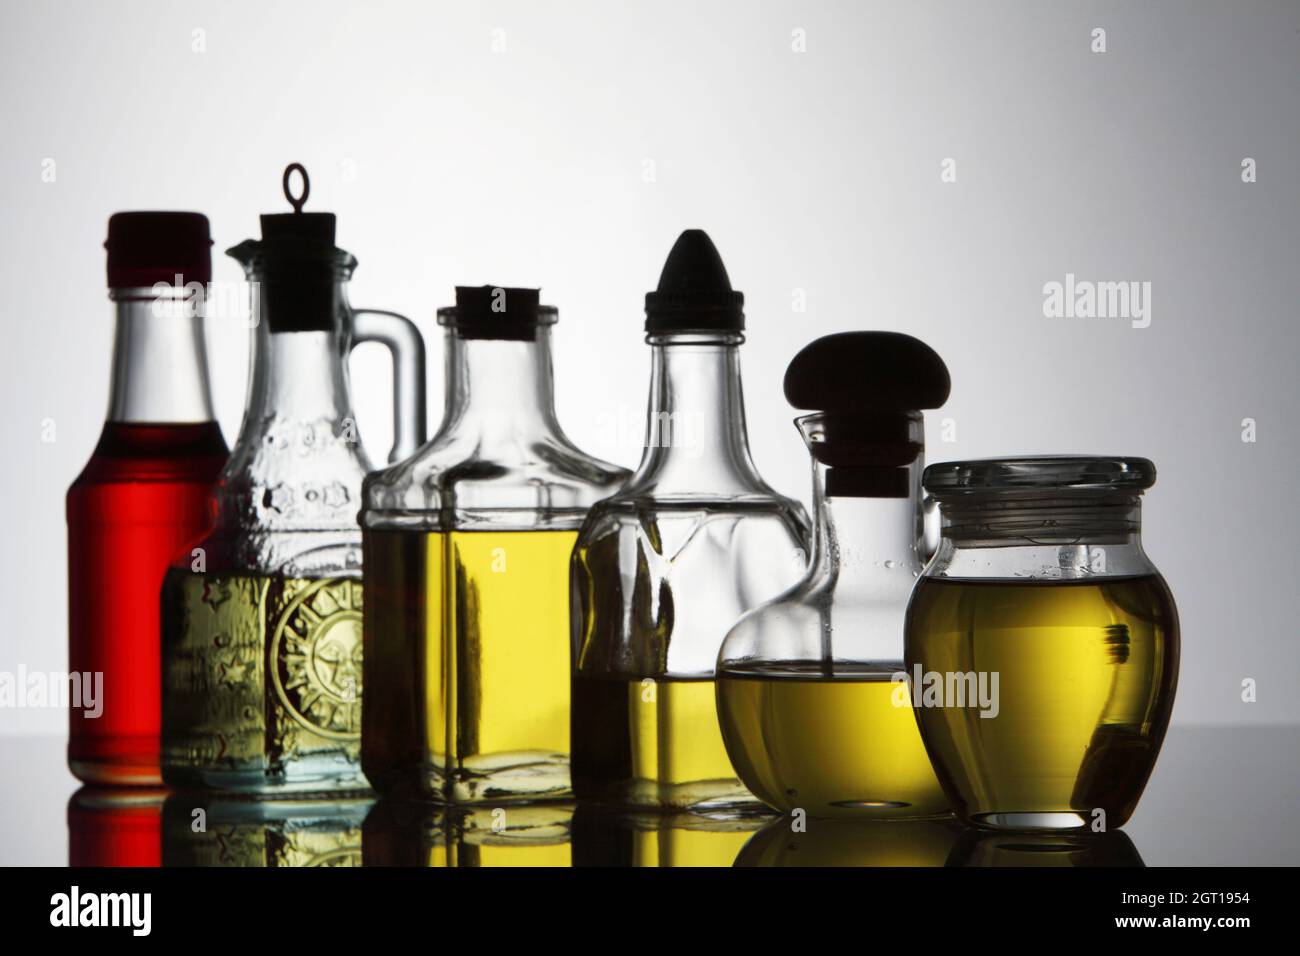 Palm Oil, Sesame Seed Oil, Olive Oil, Grape Seed Oil And Corn Oil In Glass Bottle Over White Stock Photo